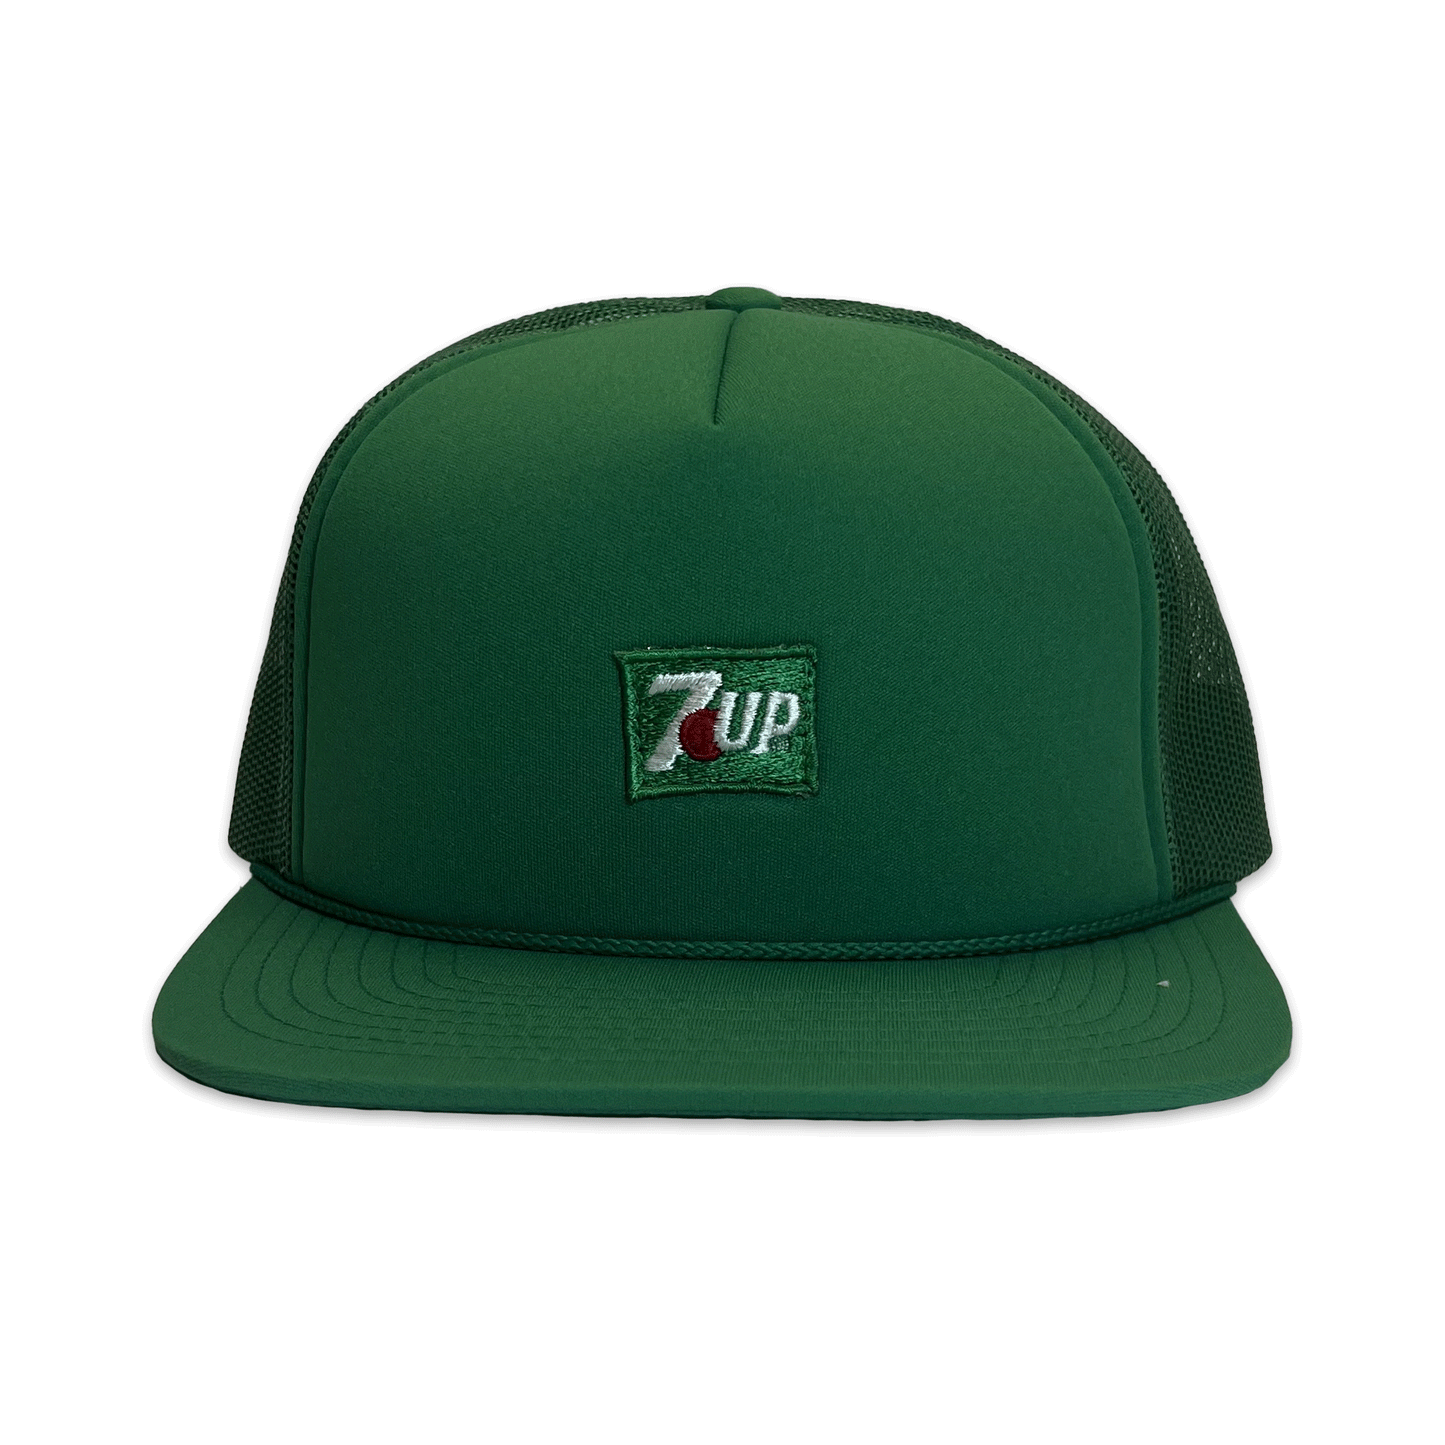 7-UP. Hat. Green.